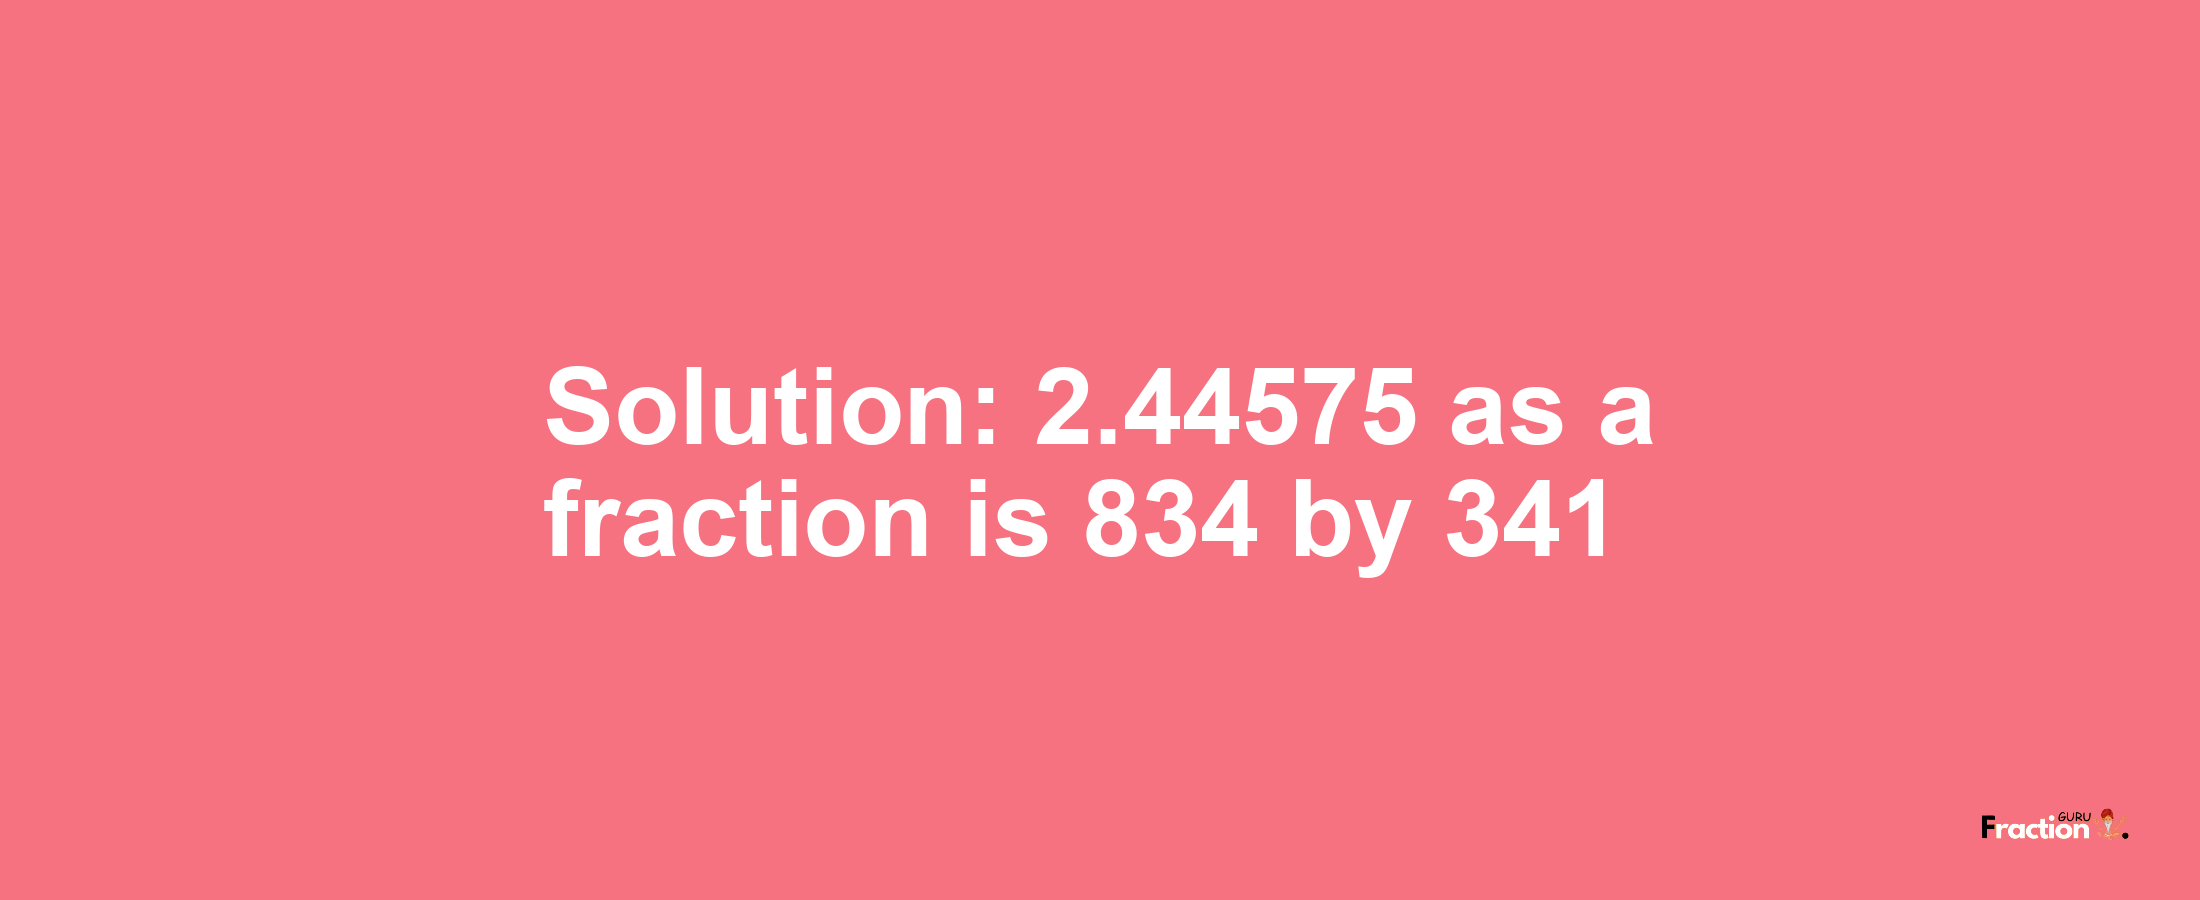 Solution:2.44575 as a fraction is 834/341